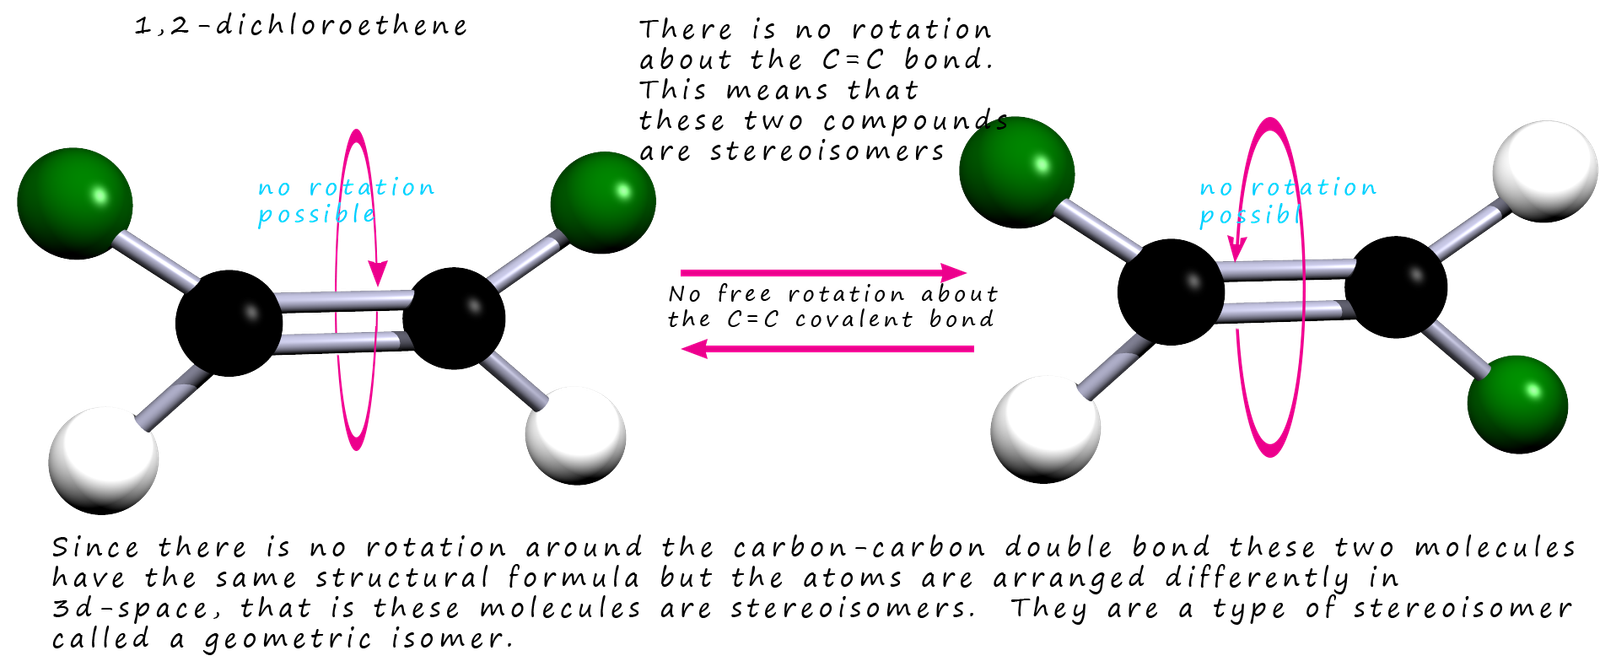 3d model of geometric isomers explaining the difference between the cis and trans isomer.